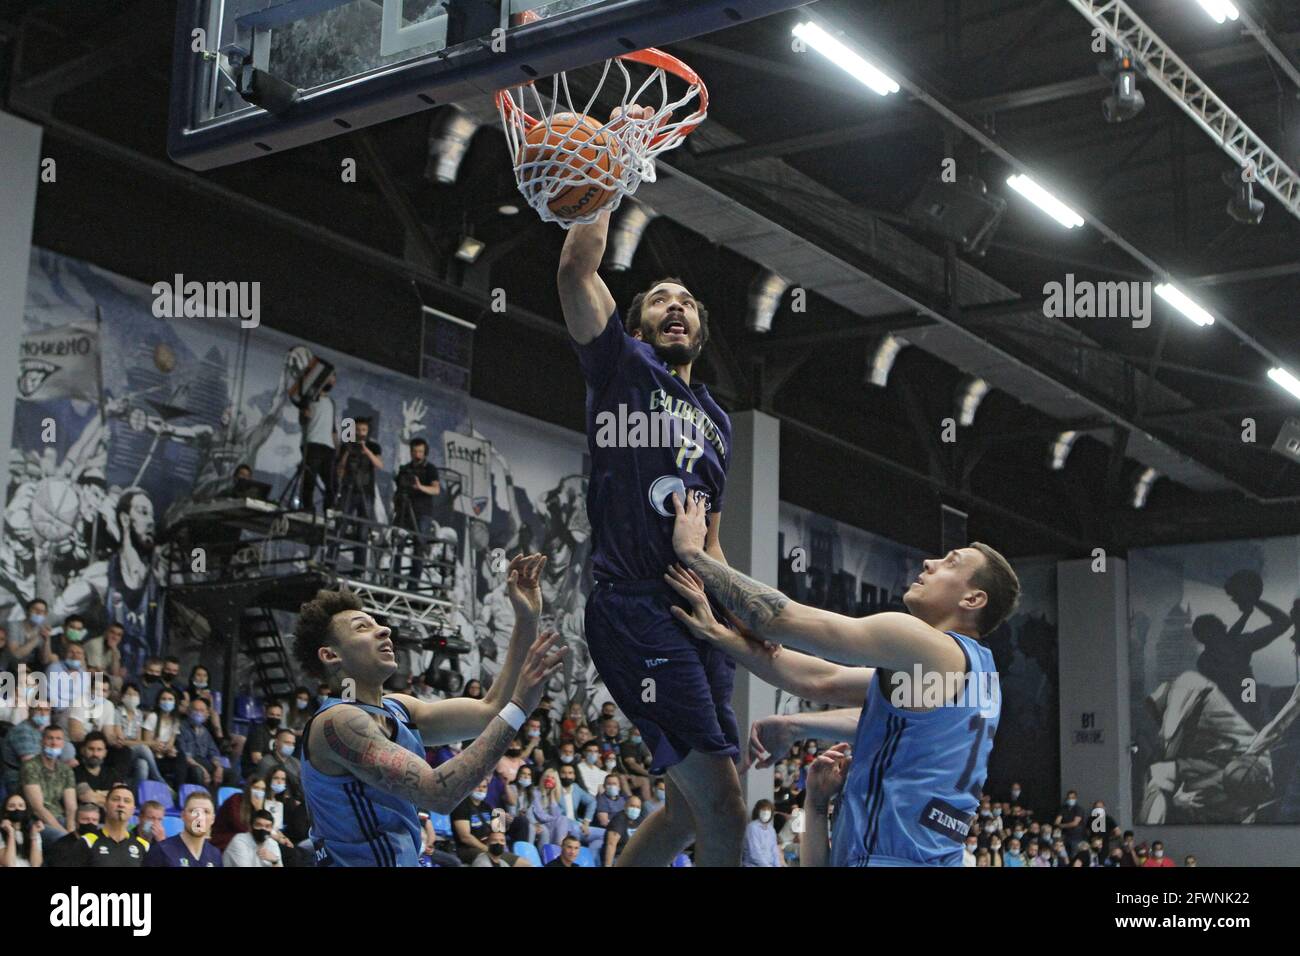 DNIPRO, UKRAINE - MAY 23, 2021 - Players of BC Dnipro (light blue kit) and  BC Budivelnyk Kyiv (dark blue kit) are seen in action during the Ukrainian  Basketball SuperLeague playoff round